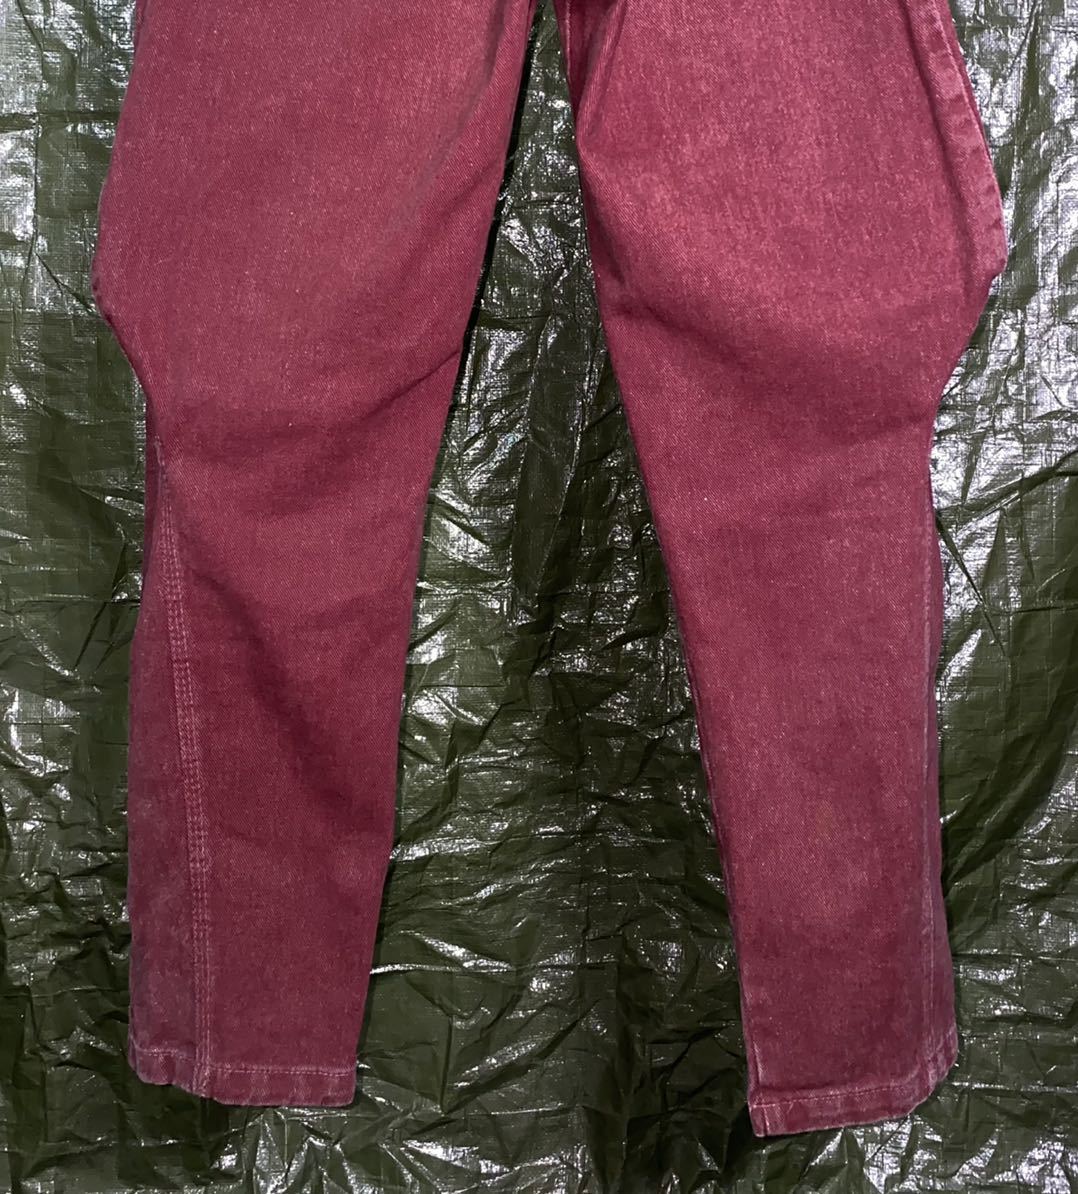 1980s MARITHE FRANCOIS GIRBAUD BALLOON JEANS CLOSED イタリア製 